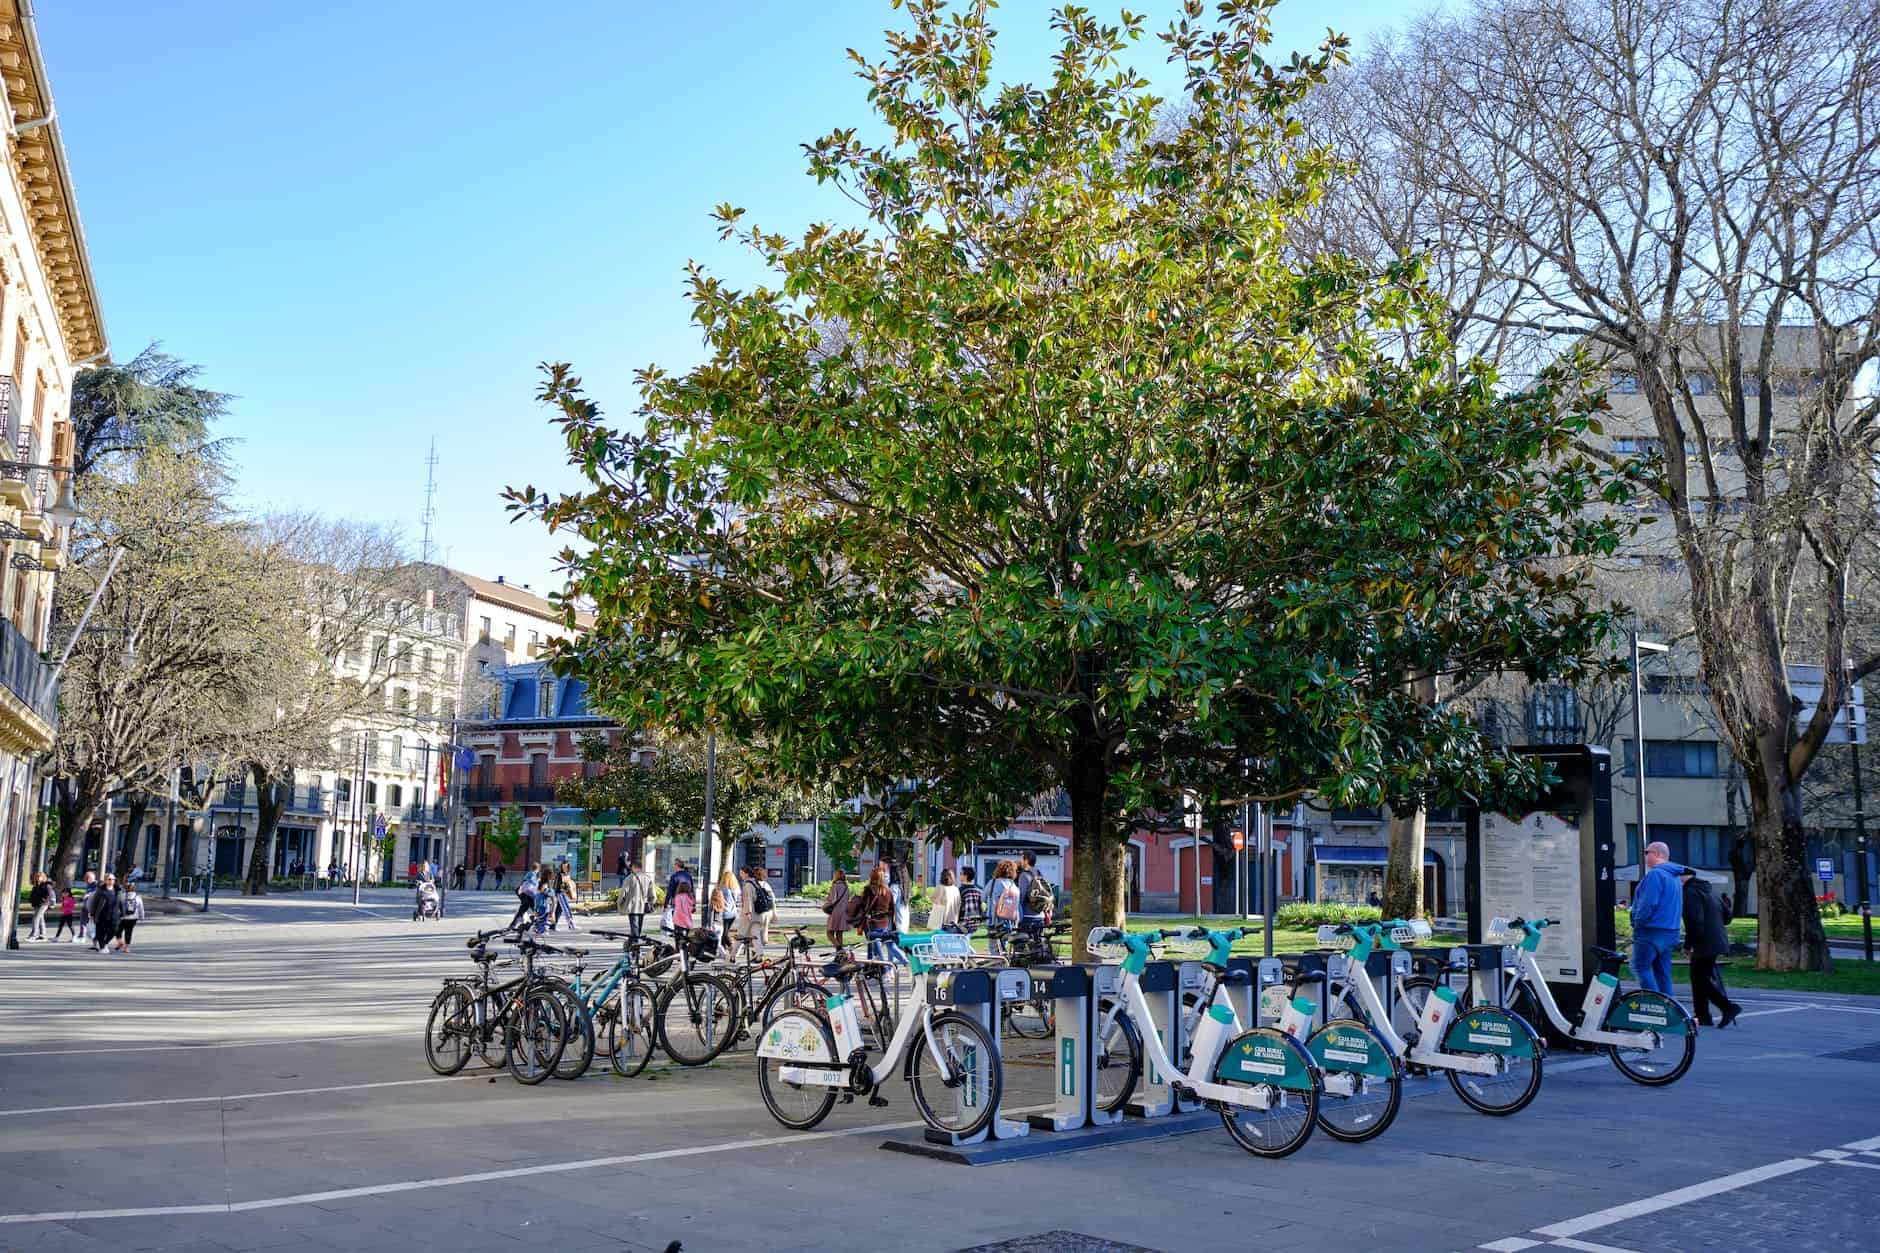 electric rental bicycles in the stand in town square